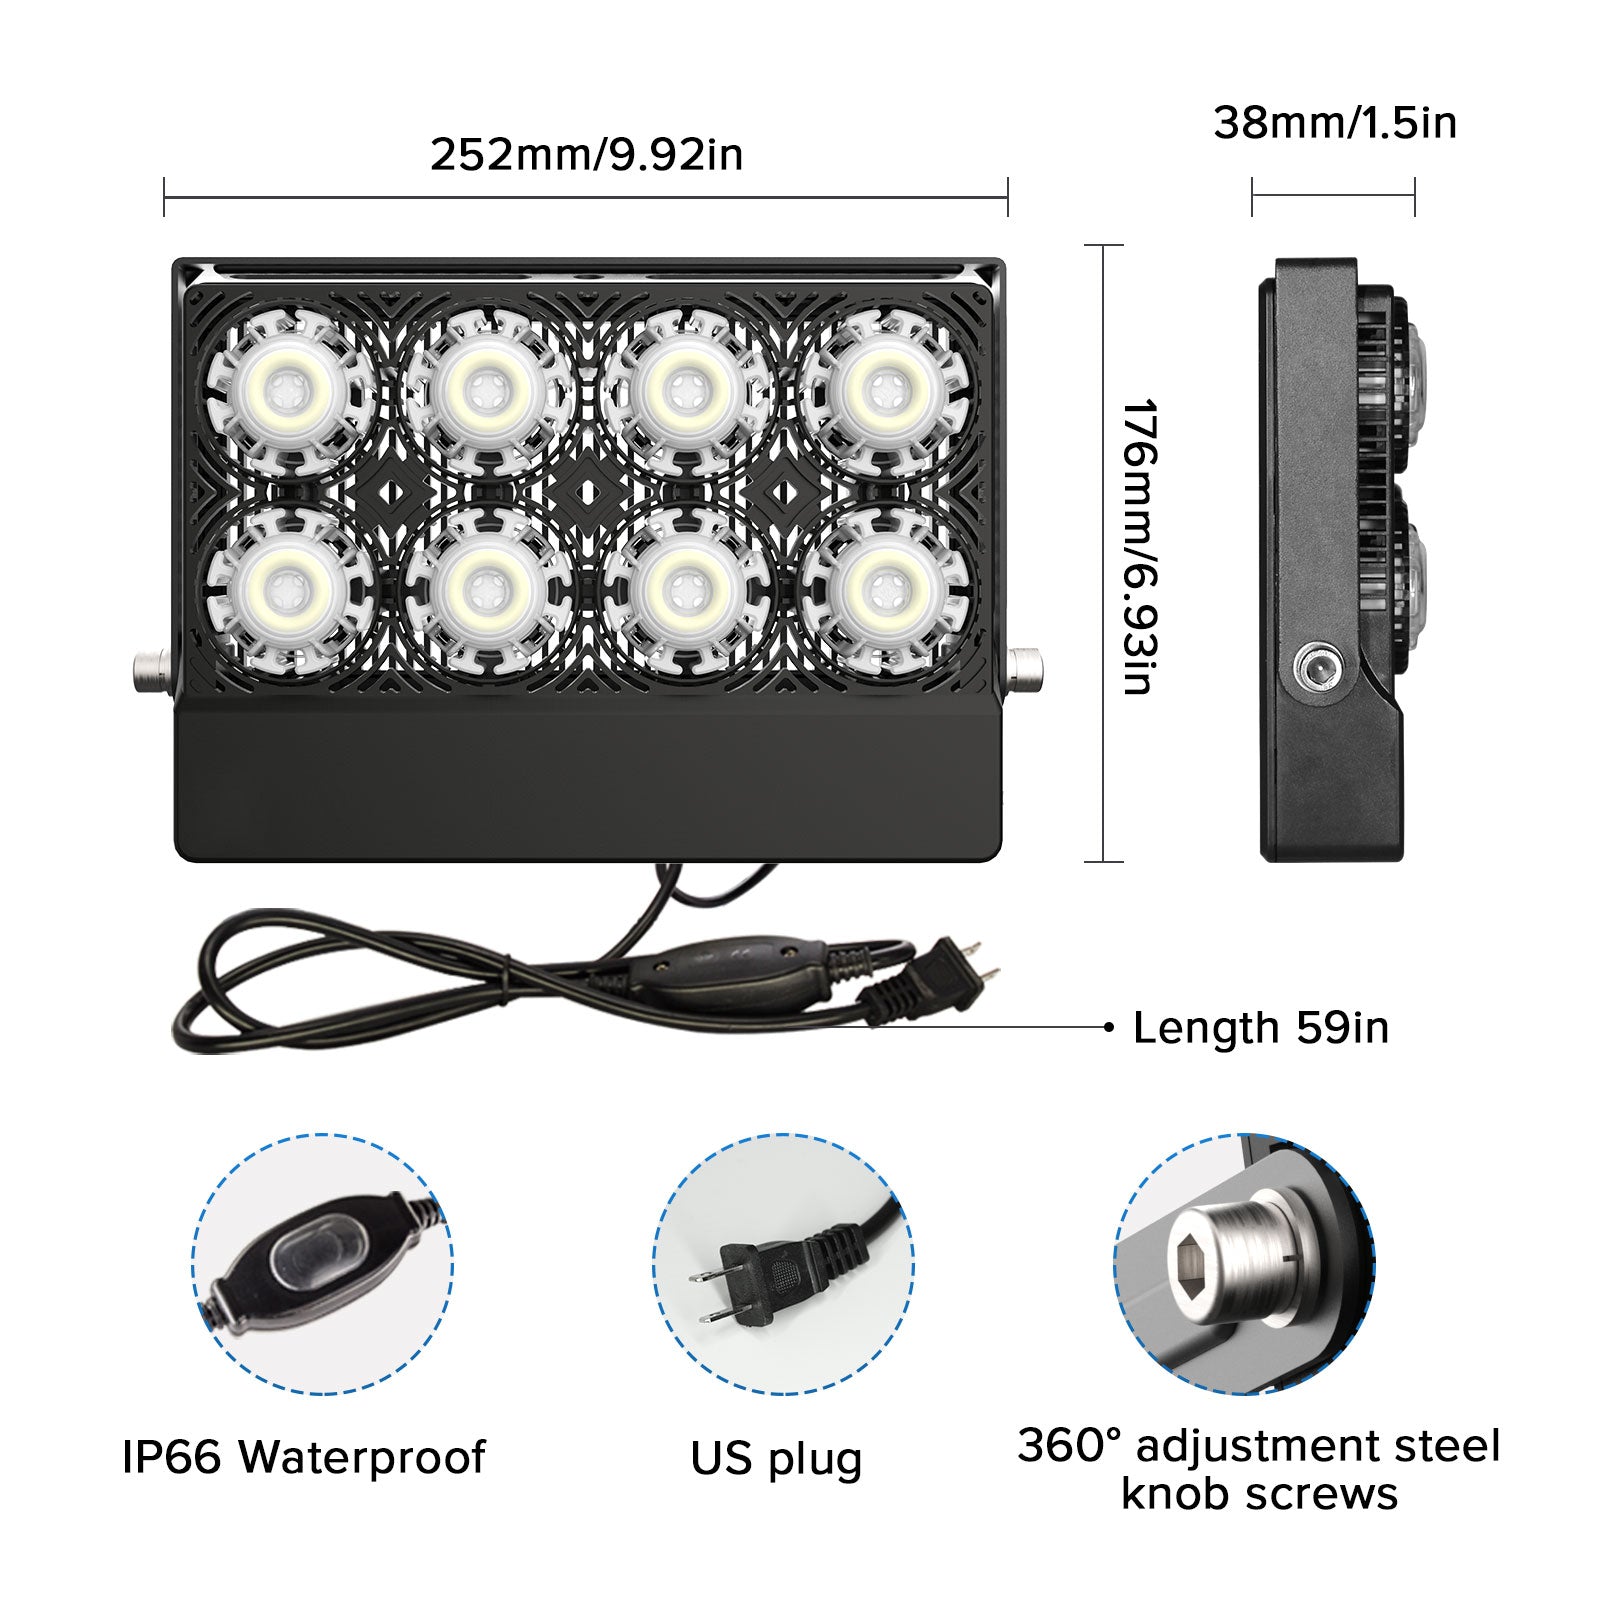 Size information and plug information for 50W LED Flood Light (US ONLY).